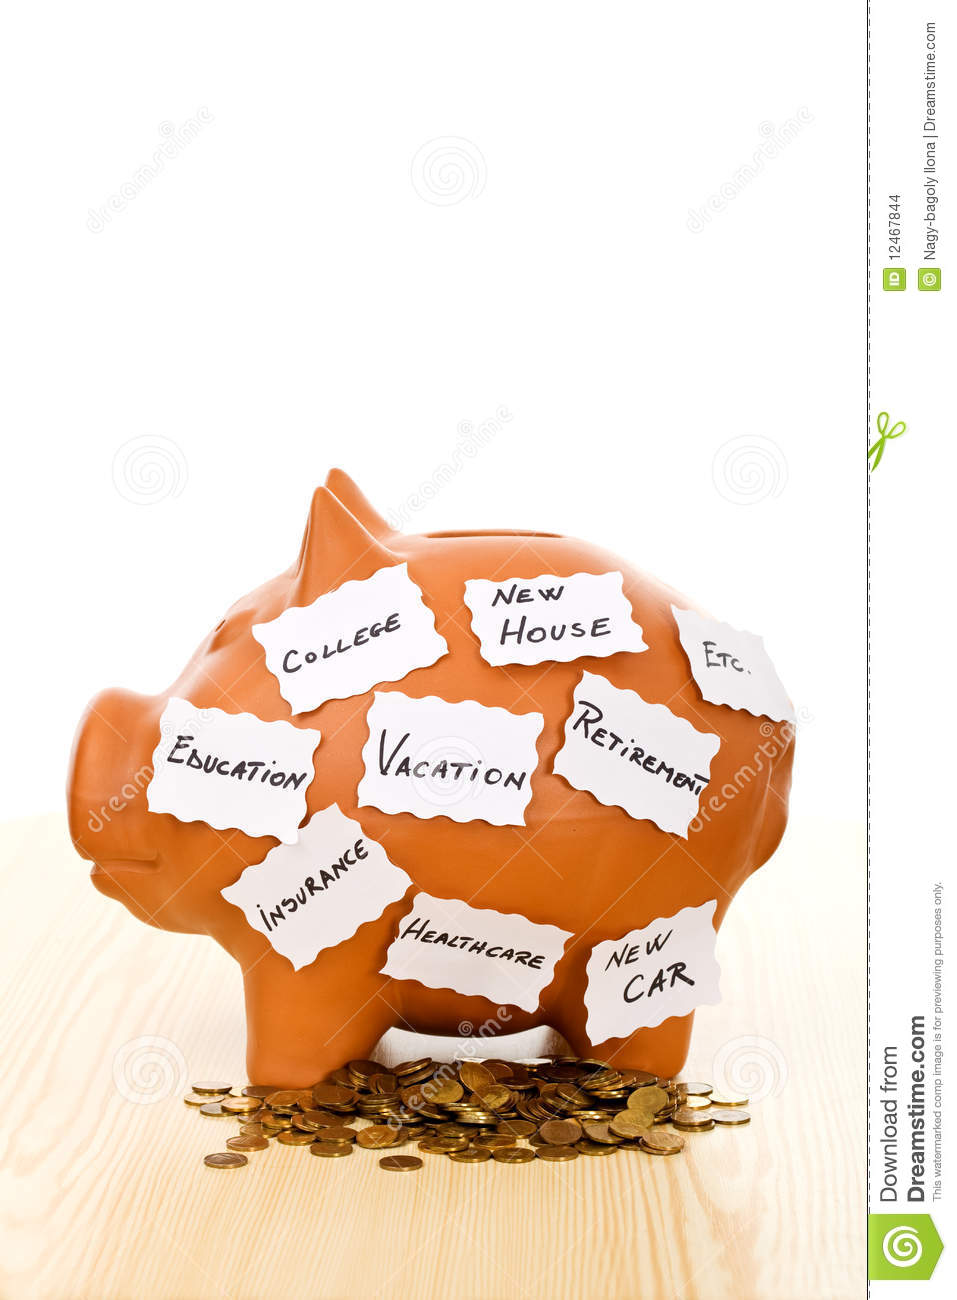 Piggy Bank With Notes   Saving Concept Stock Images   Image  12467844